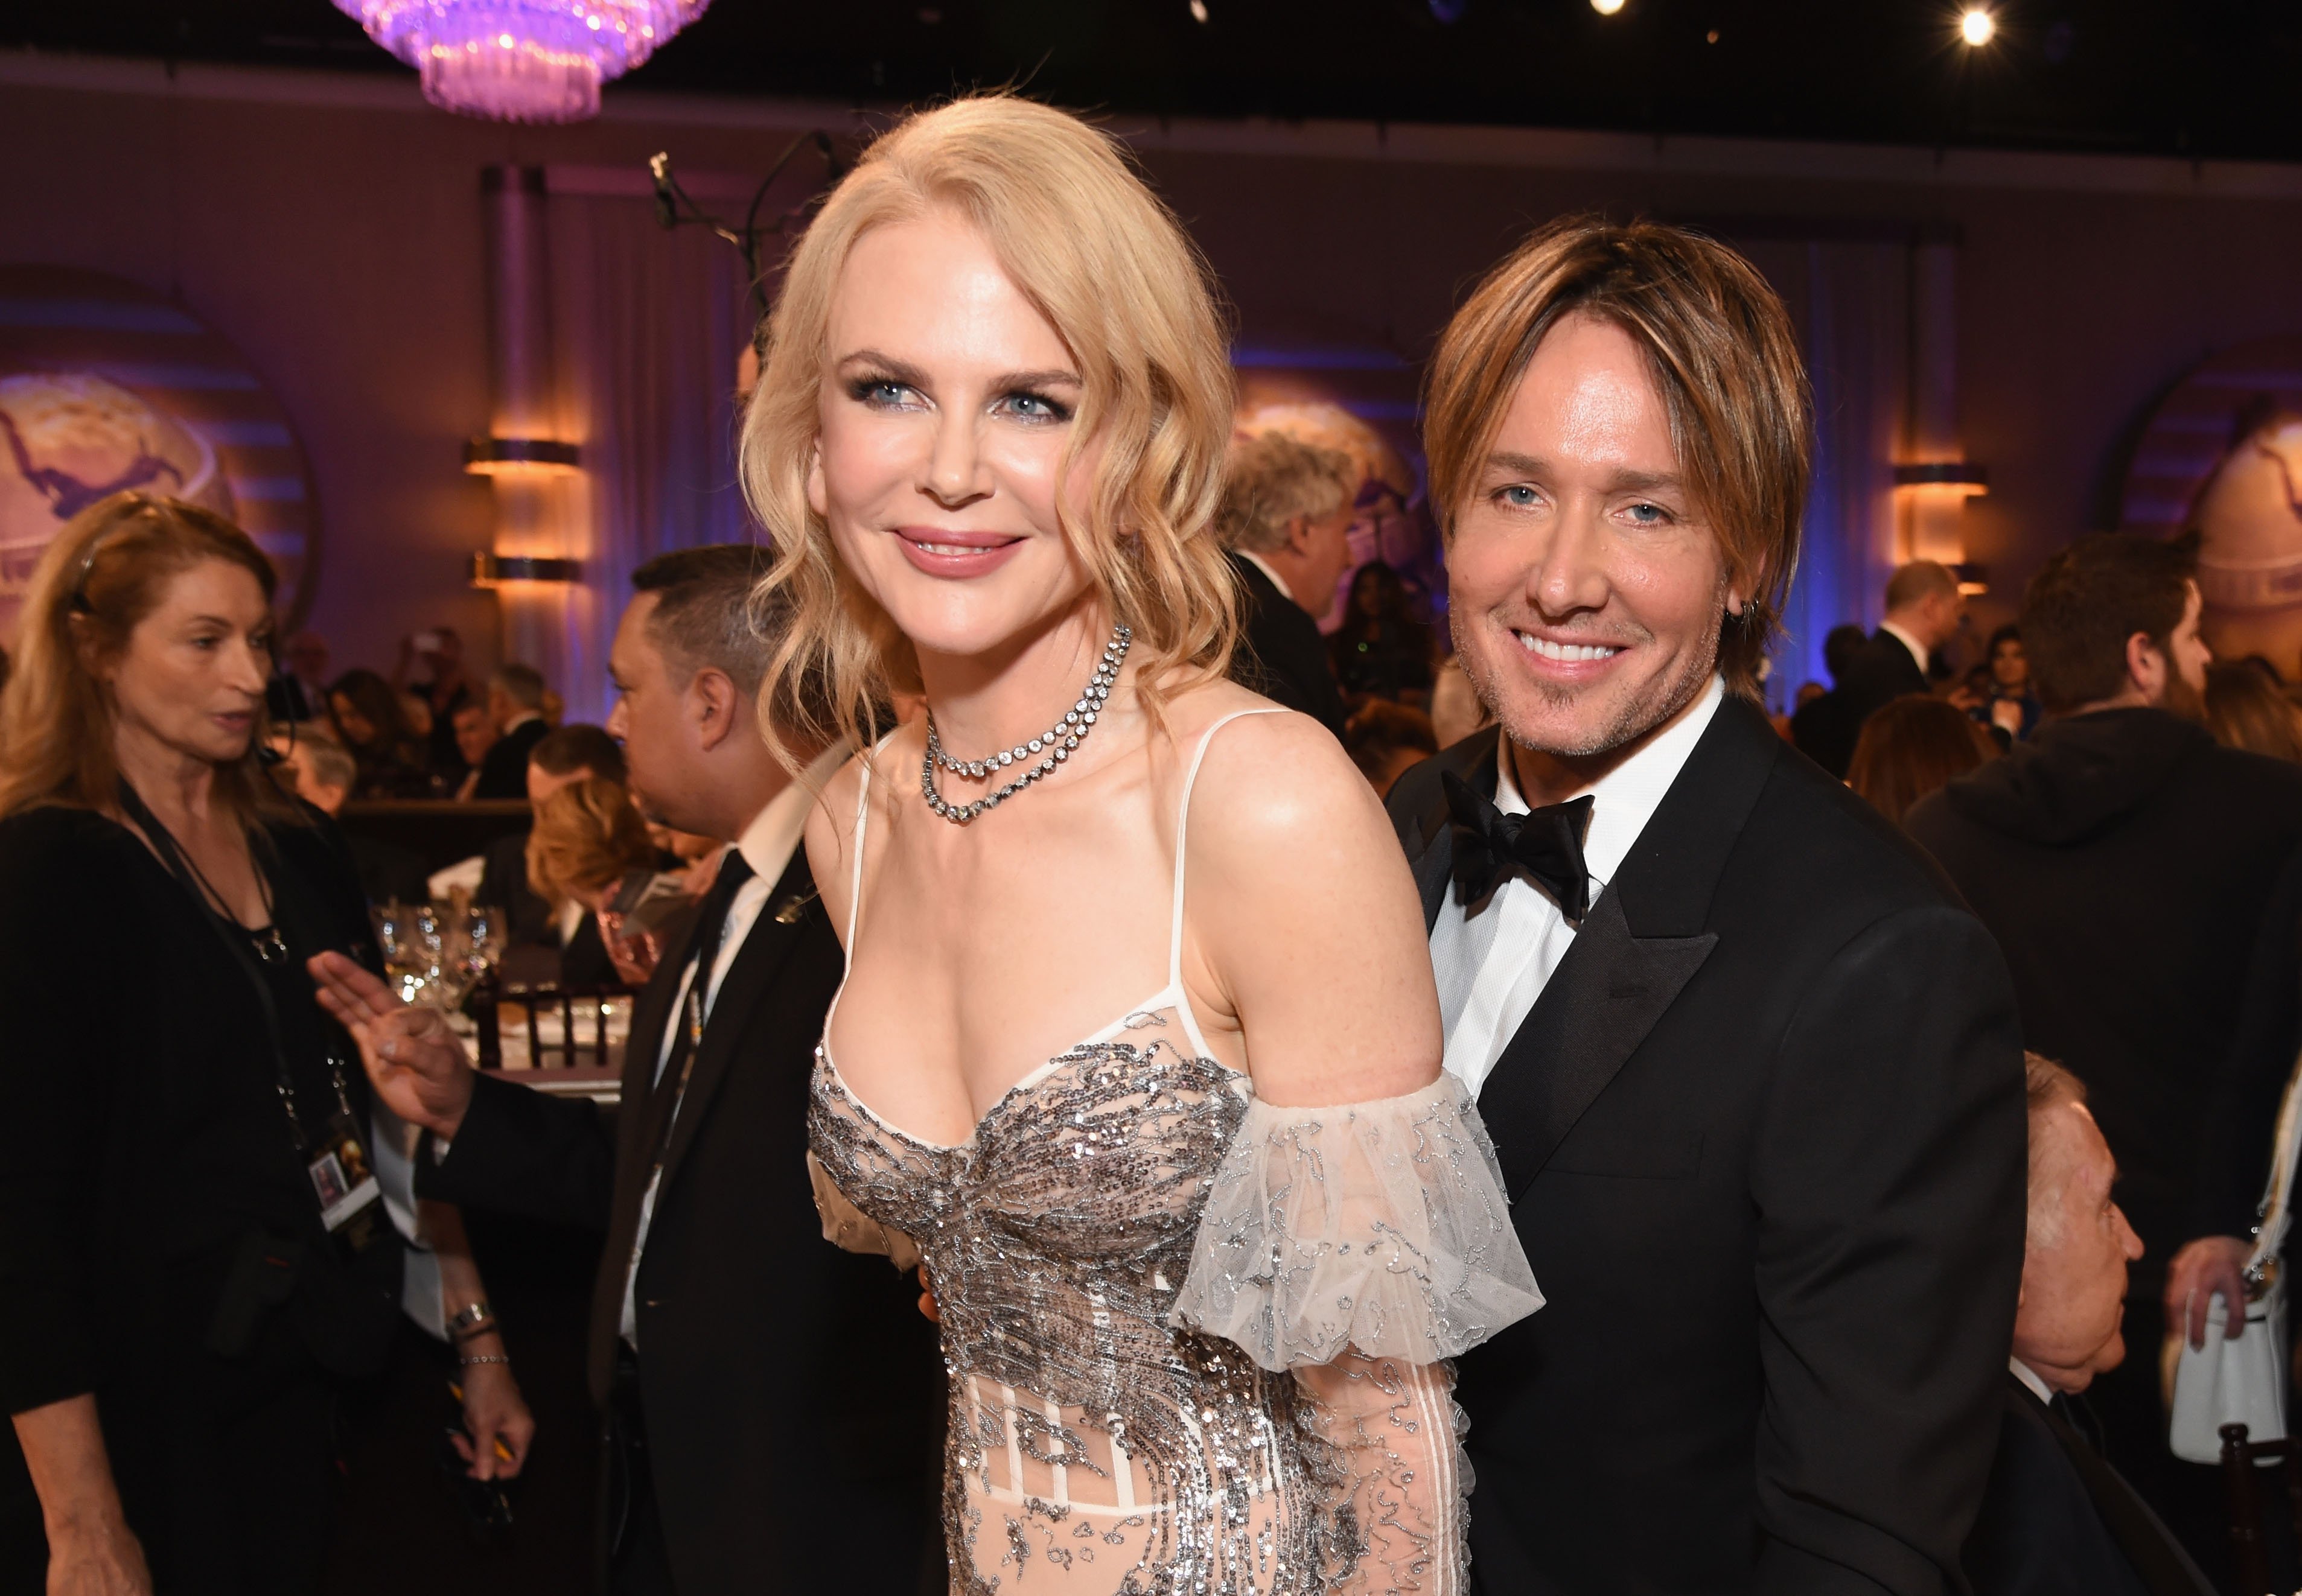 Nicole Kidman & Keith Urban at the 74th Annual Golden Globe Awards on Jan. 8, 2017 in California | Photo: Getty Images